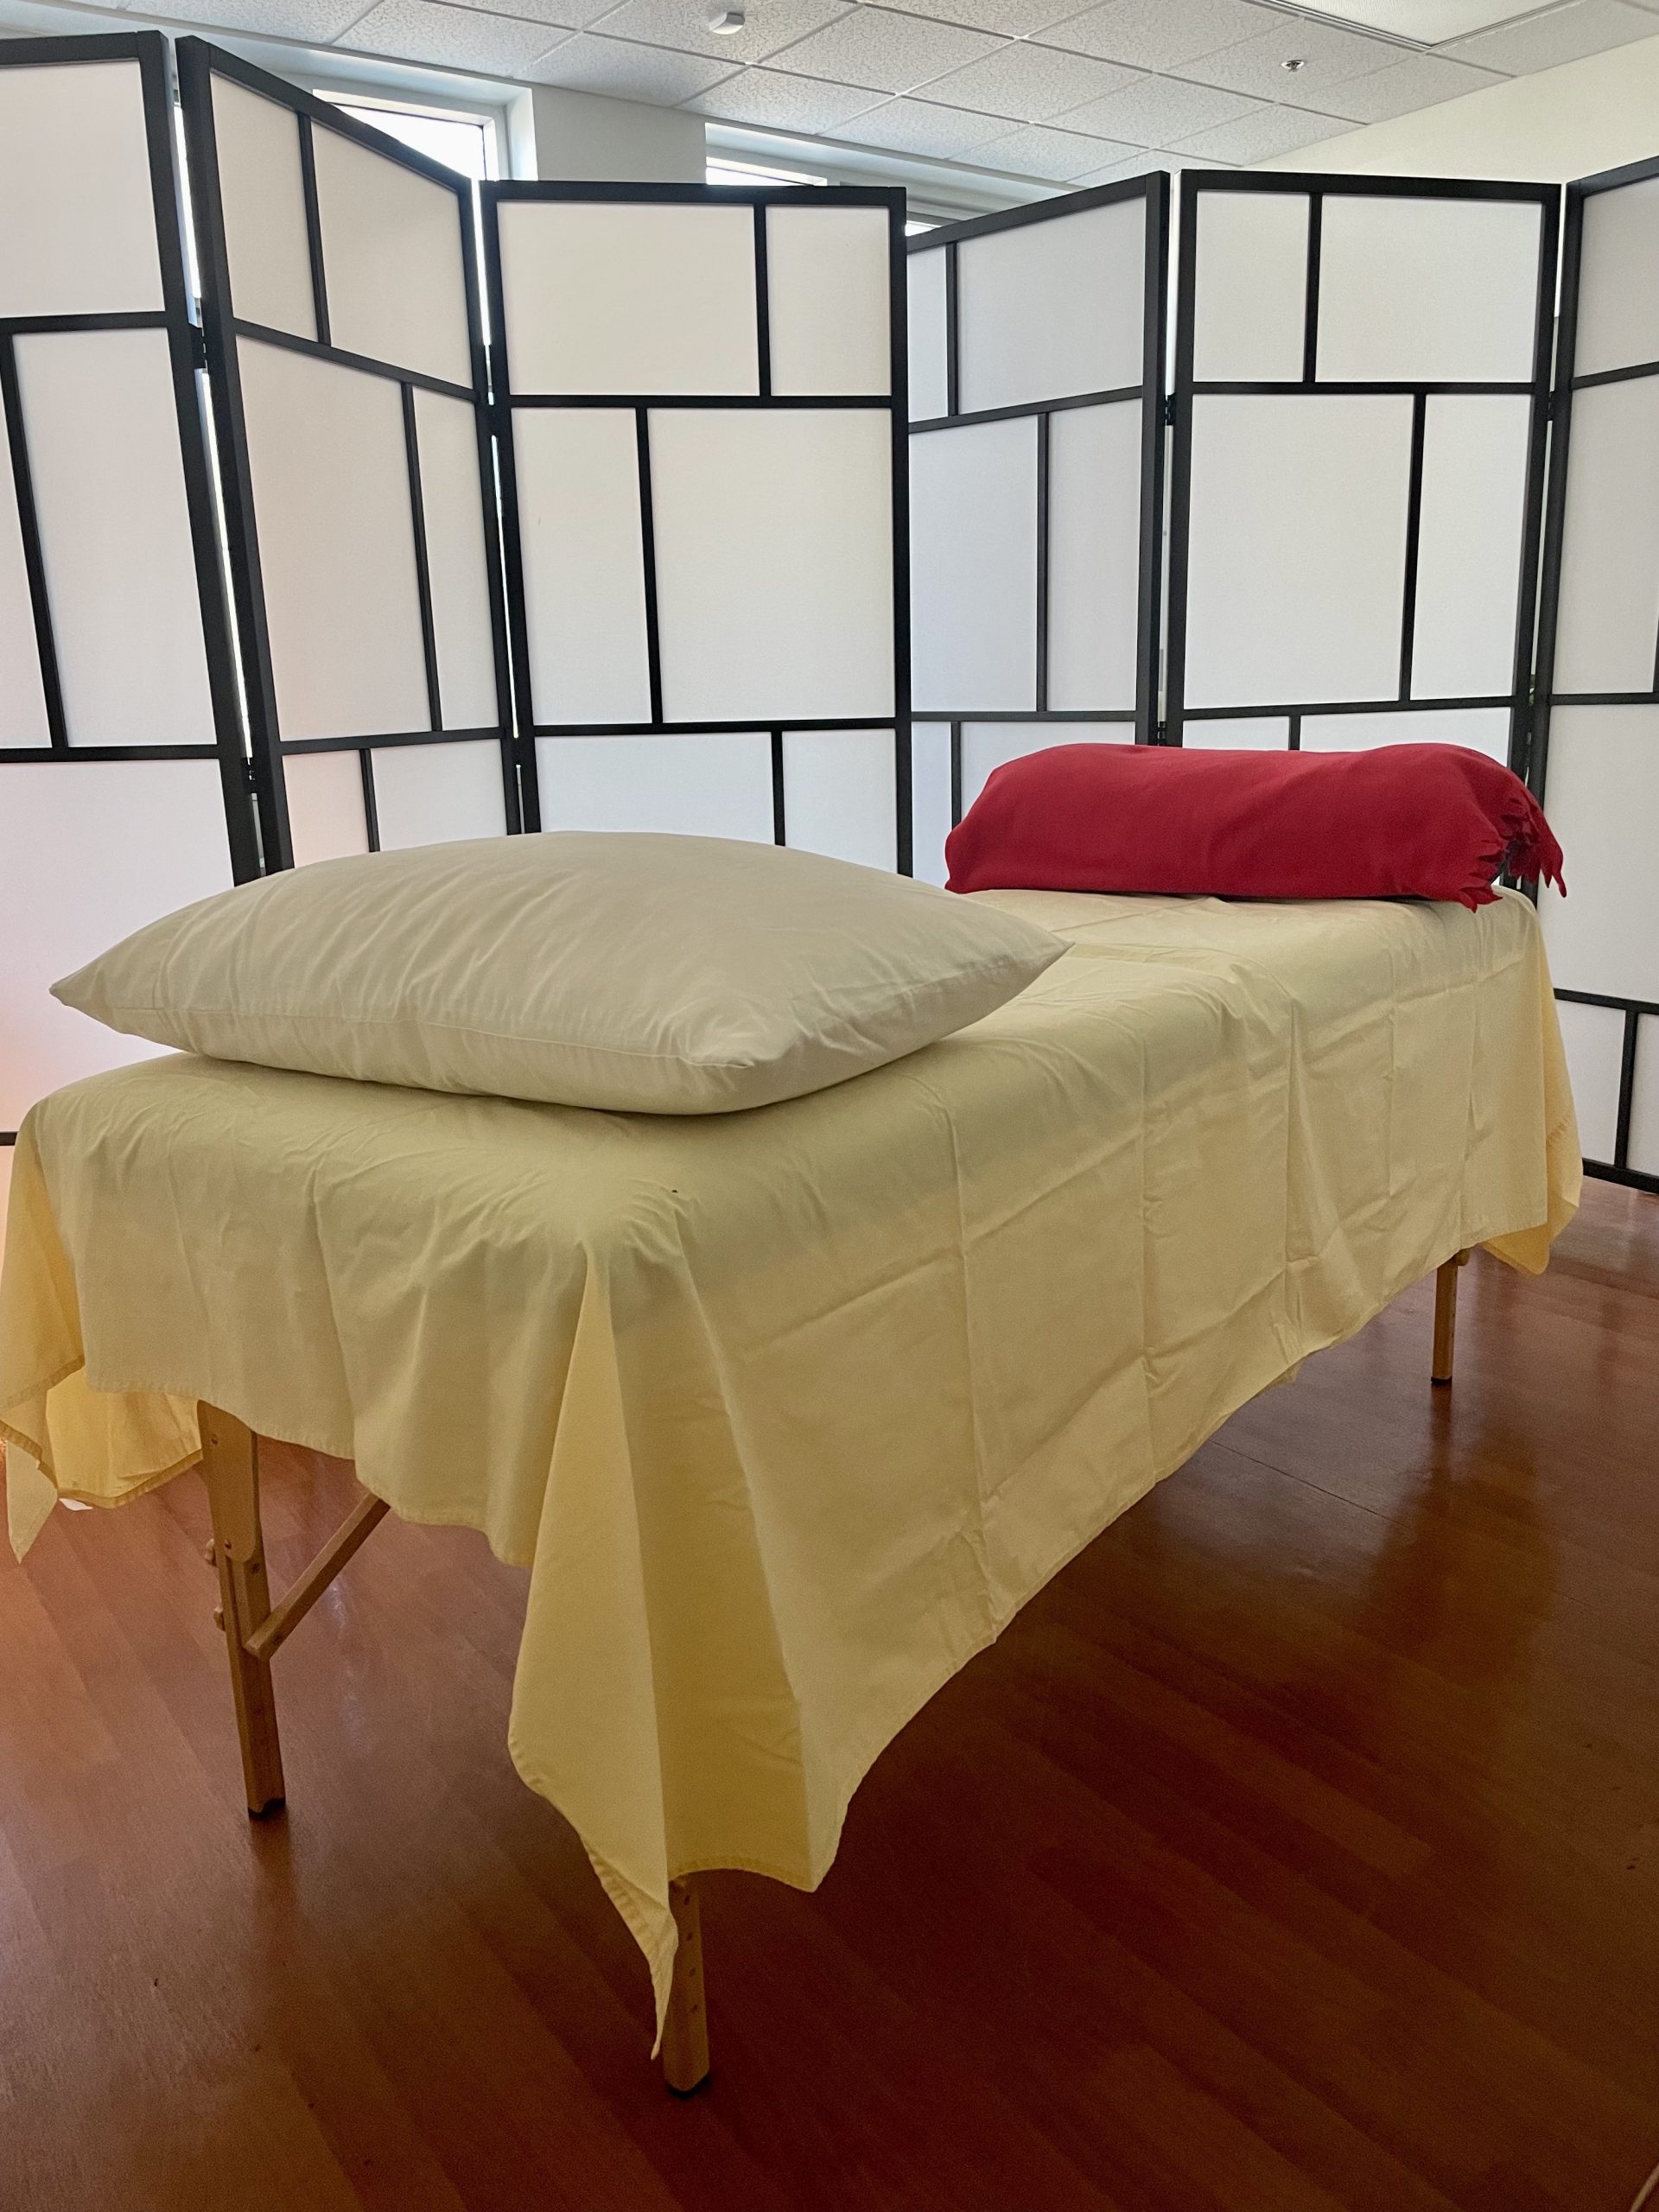 Massage table draped in a yellow sheet with a white pillow on the near end and a red bolster on the far end. View is on an angle. White and black screens are visible in the background.